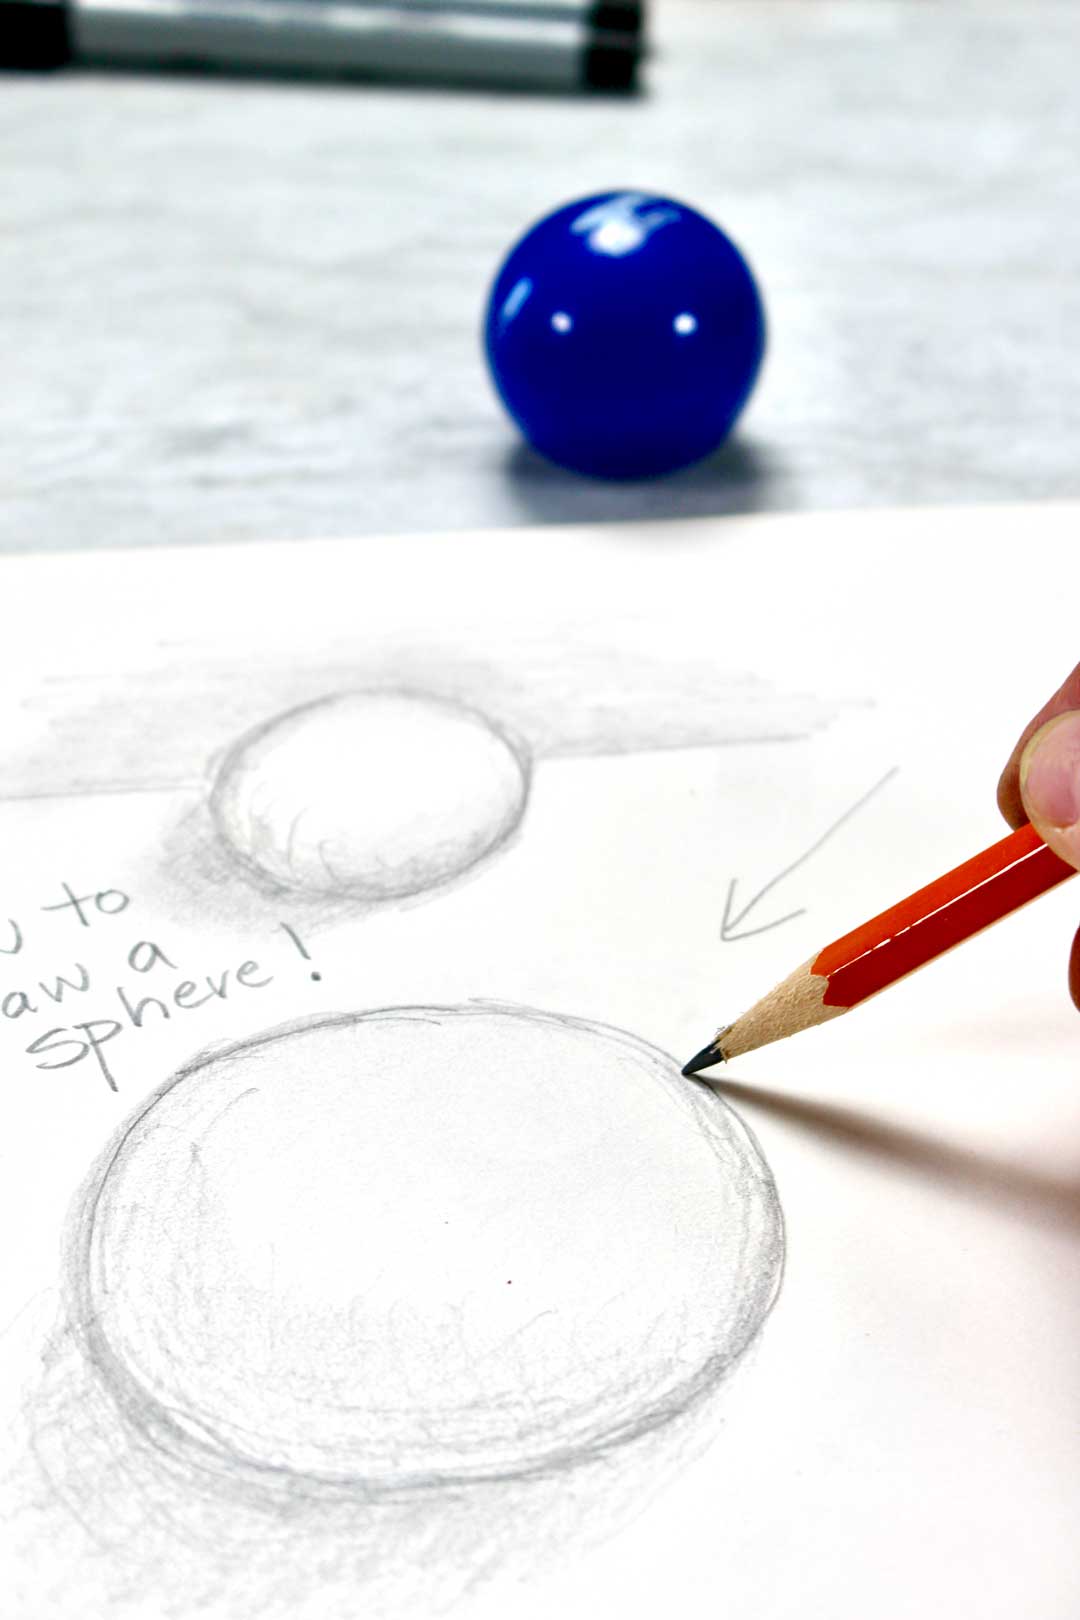 A pencil drawing the outline of a sphere, with a ball nearby.